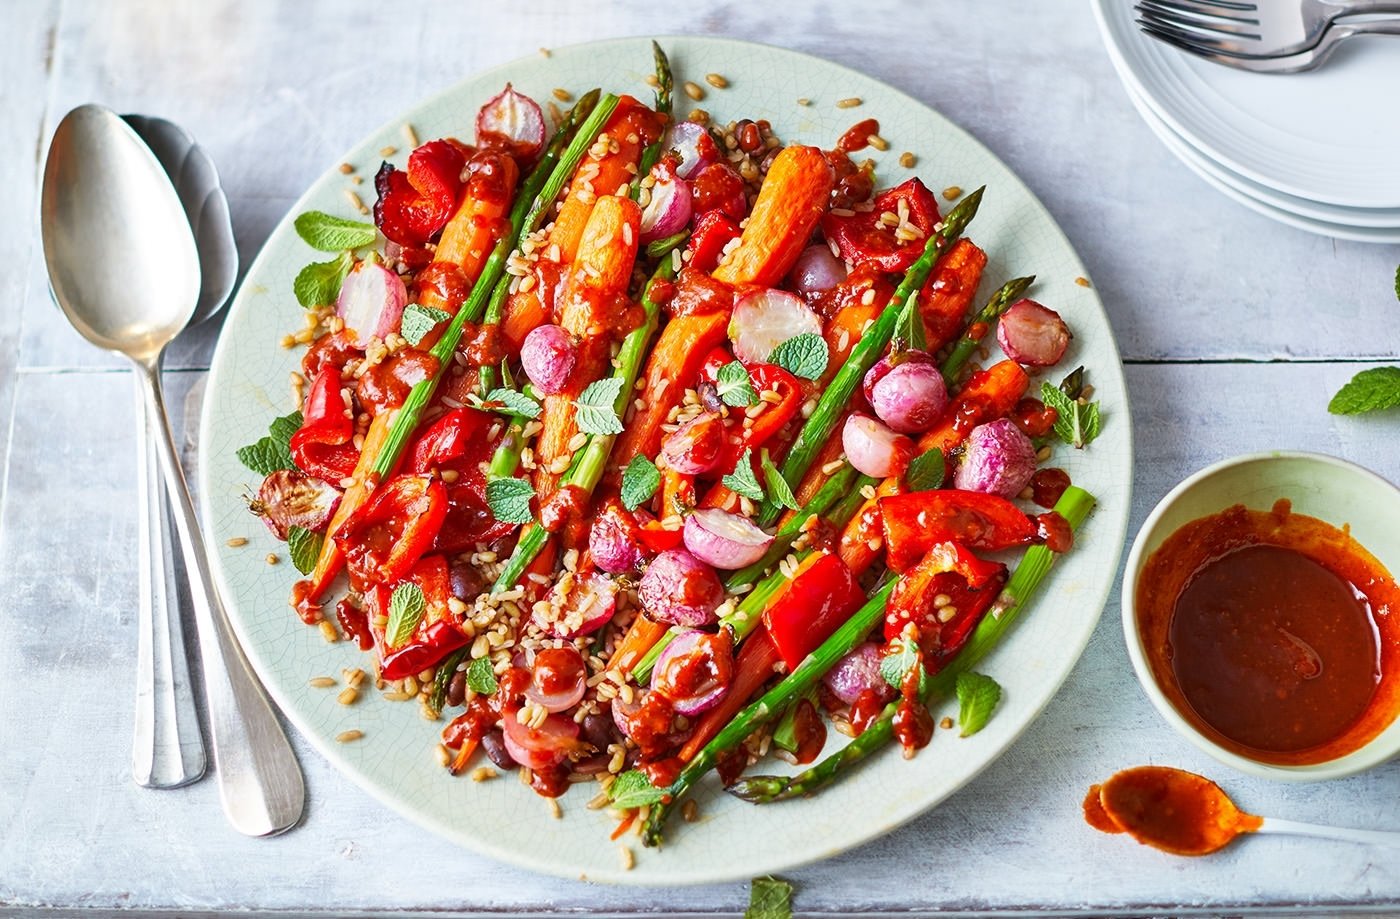 10 Pretty Healthy And Quick Lunch Ideas healthy lunch ideas tesco real food 2022